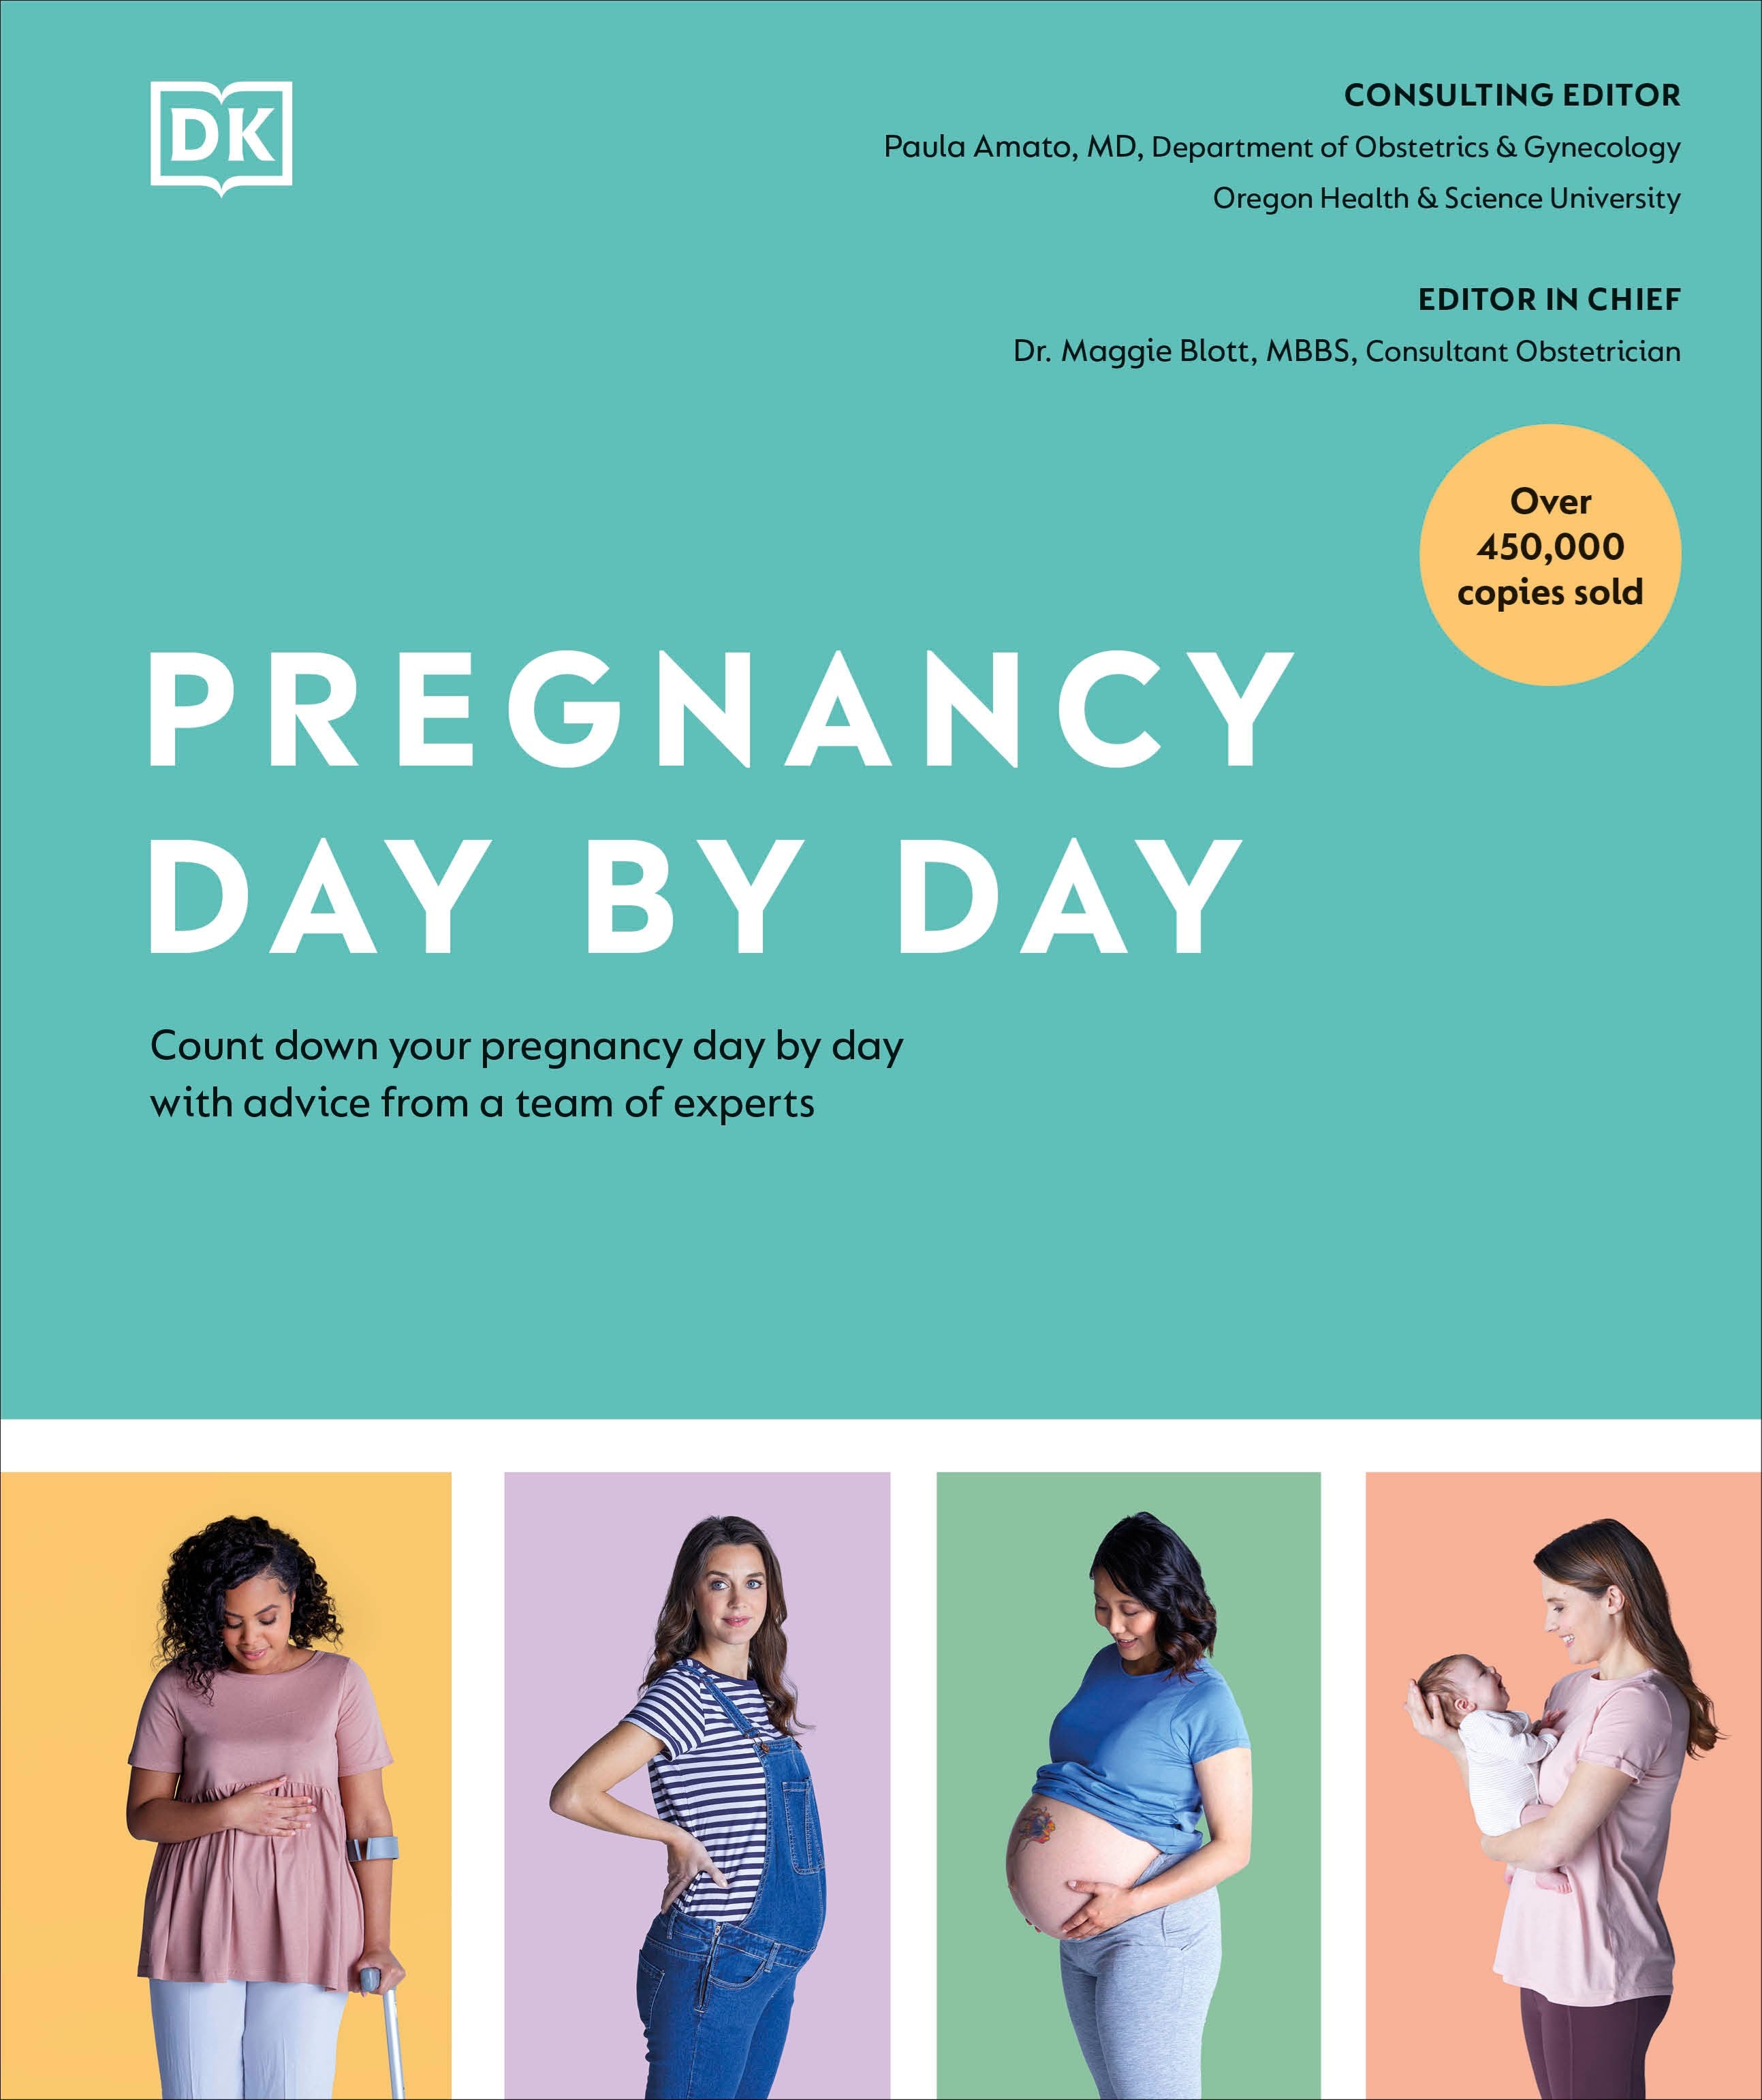 Pregnancy Day by Day: Count Down Your Pregnancy Day by Day with Advice from a Team of Experts (4th Edition)